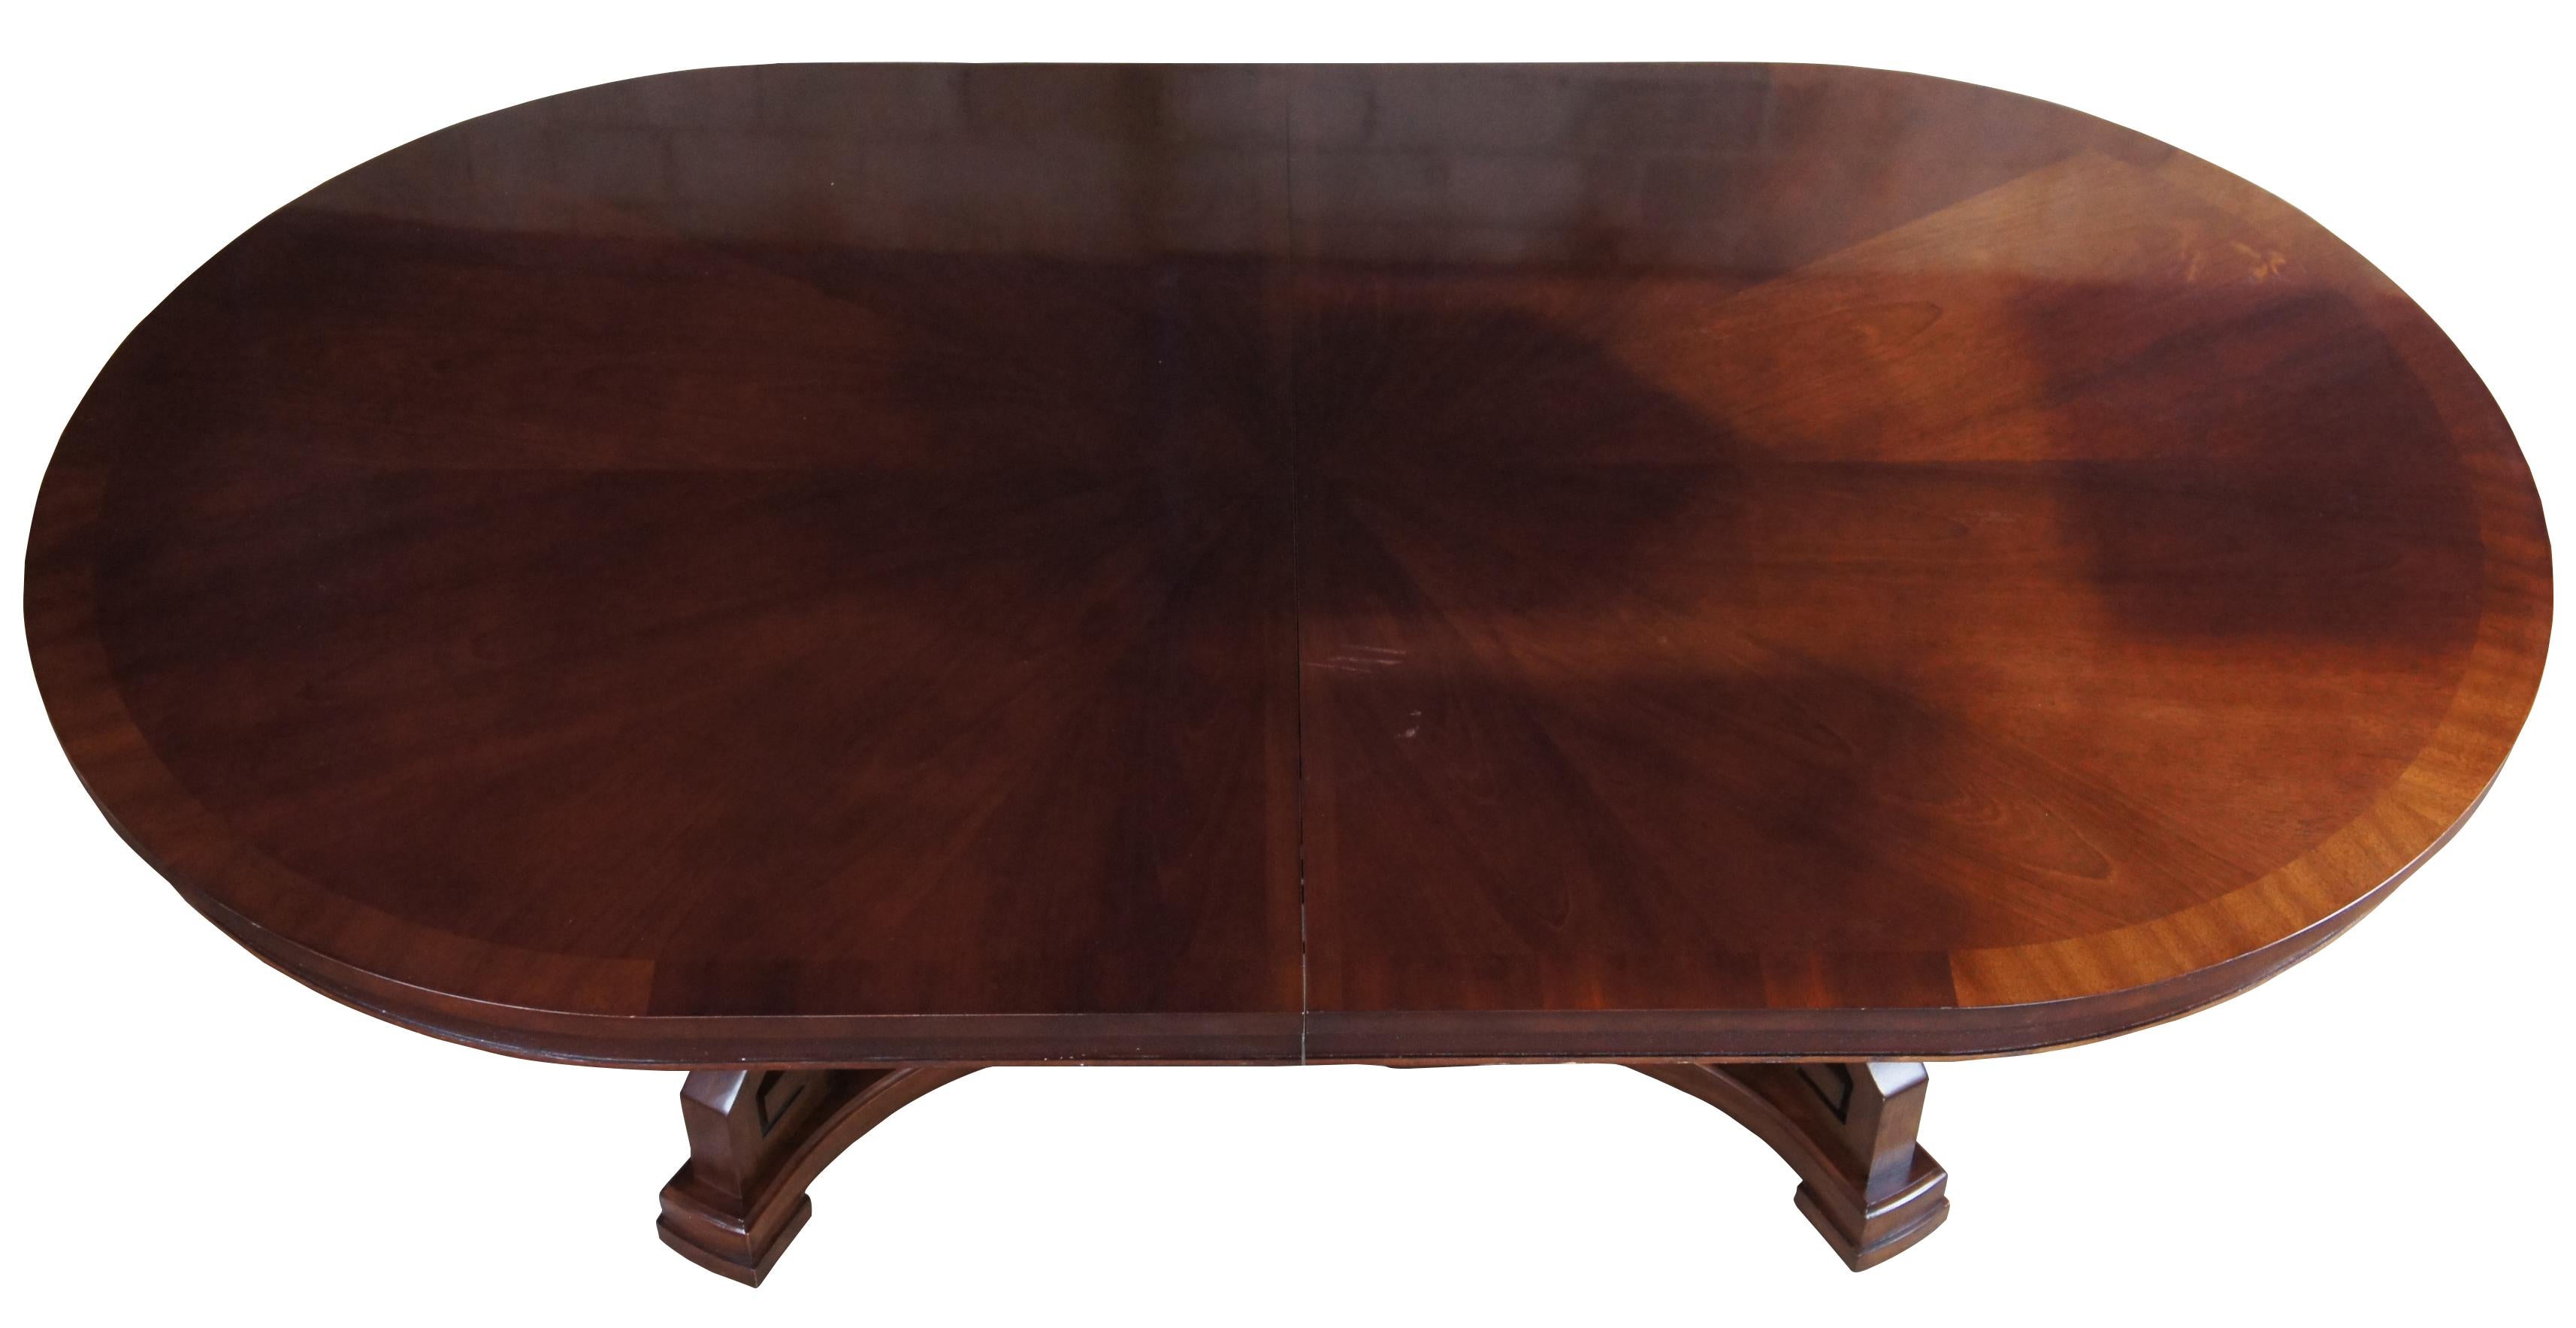 Berhhardt mahogany oval dining table. Features an Art Deco style base with Greek key and columnar supports, banded top and two large leaves for extention. Measures: 118